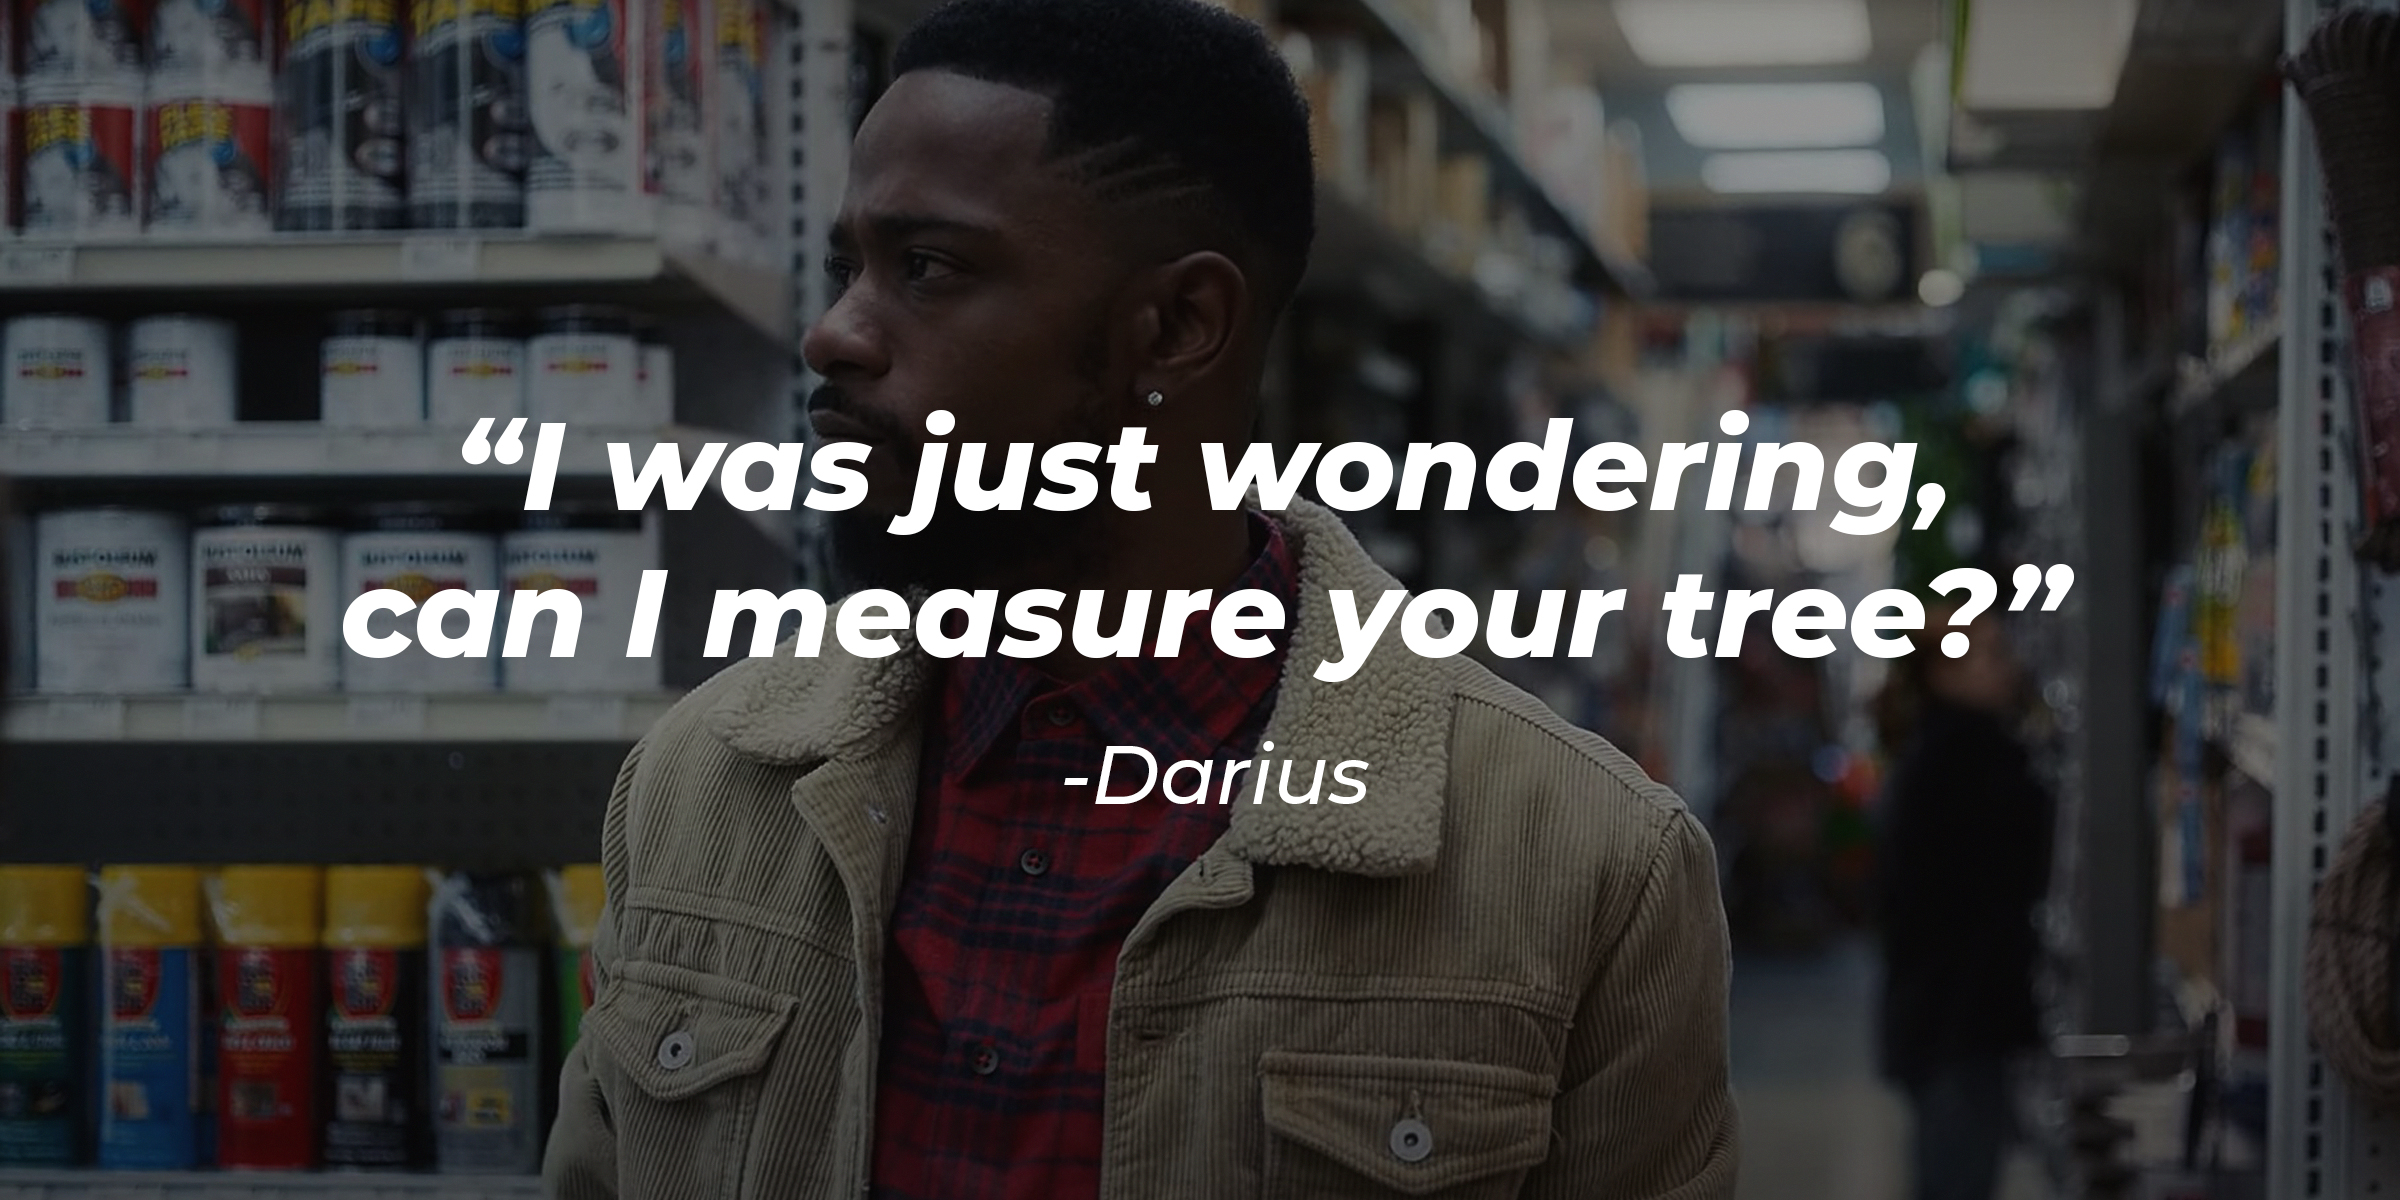 Darius in a shop with an overlaid quote by him: “I was just wondering, can I measure your tree?” | Source: youtube.com/FXNetworks